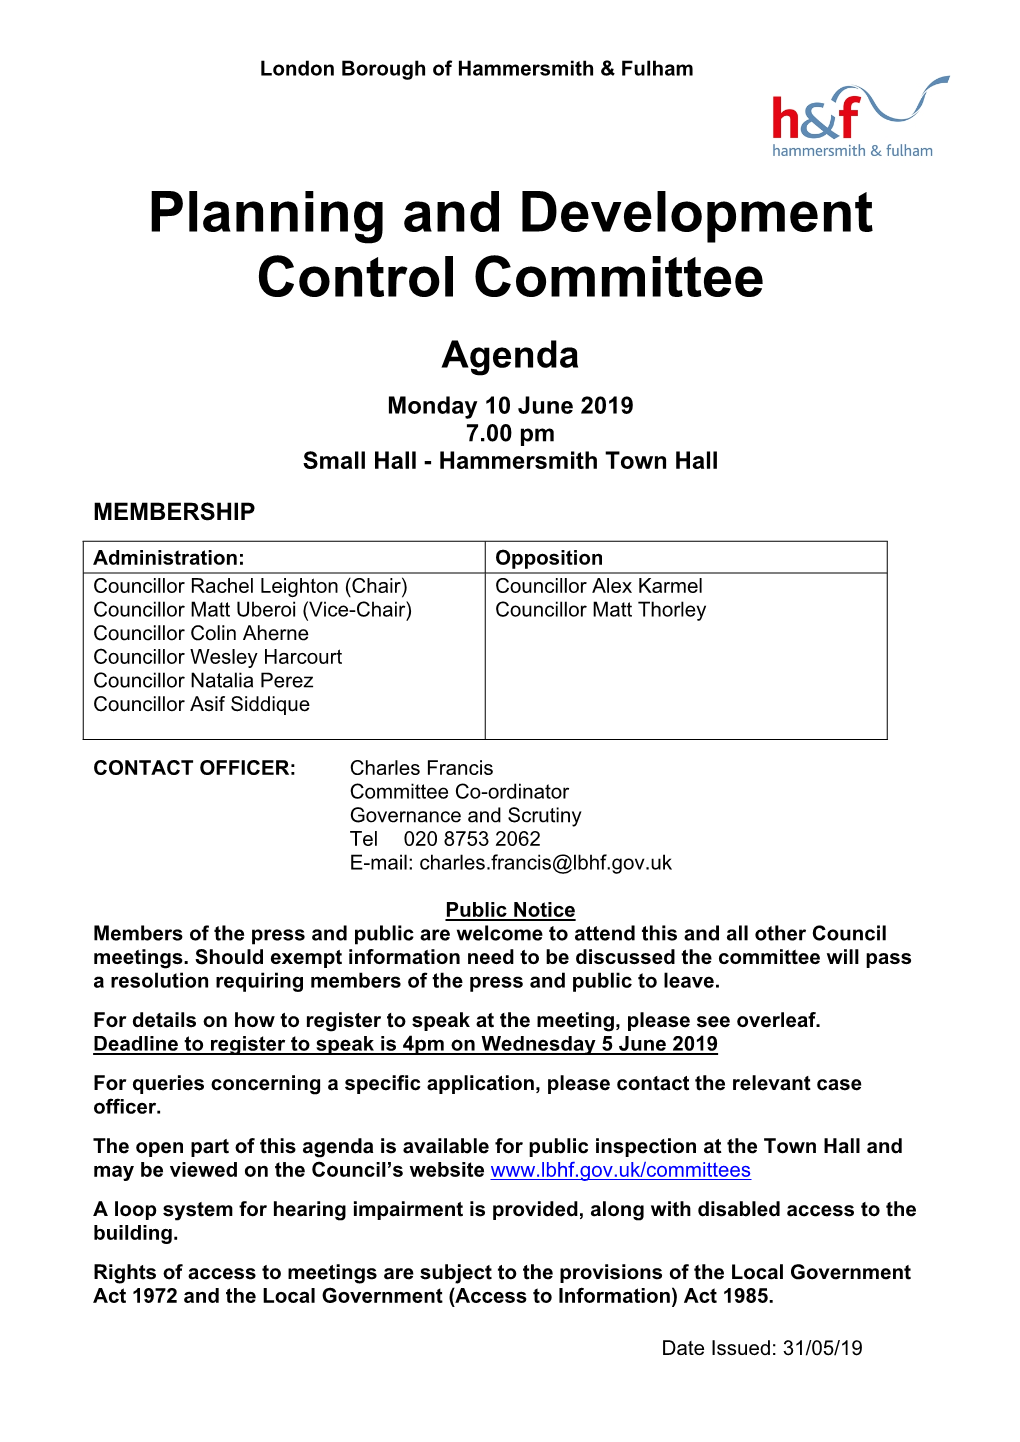 (Public Pack)Agenda Document for Planning and Development Control